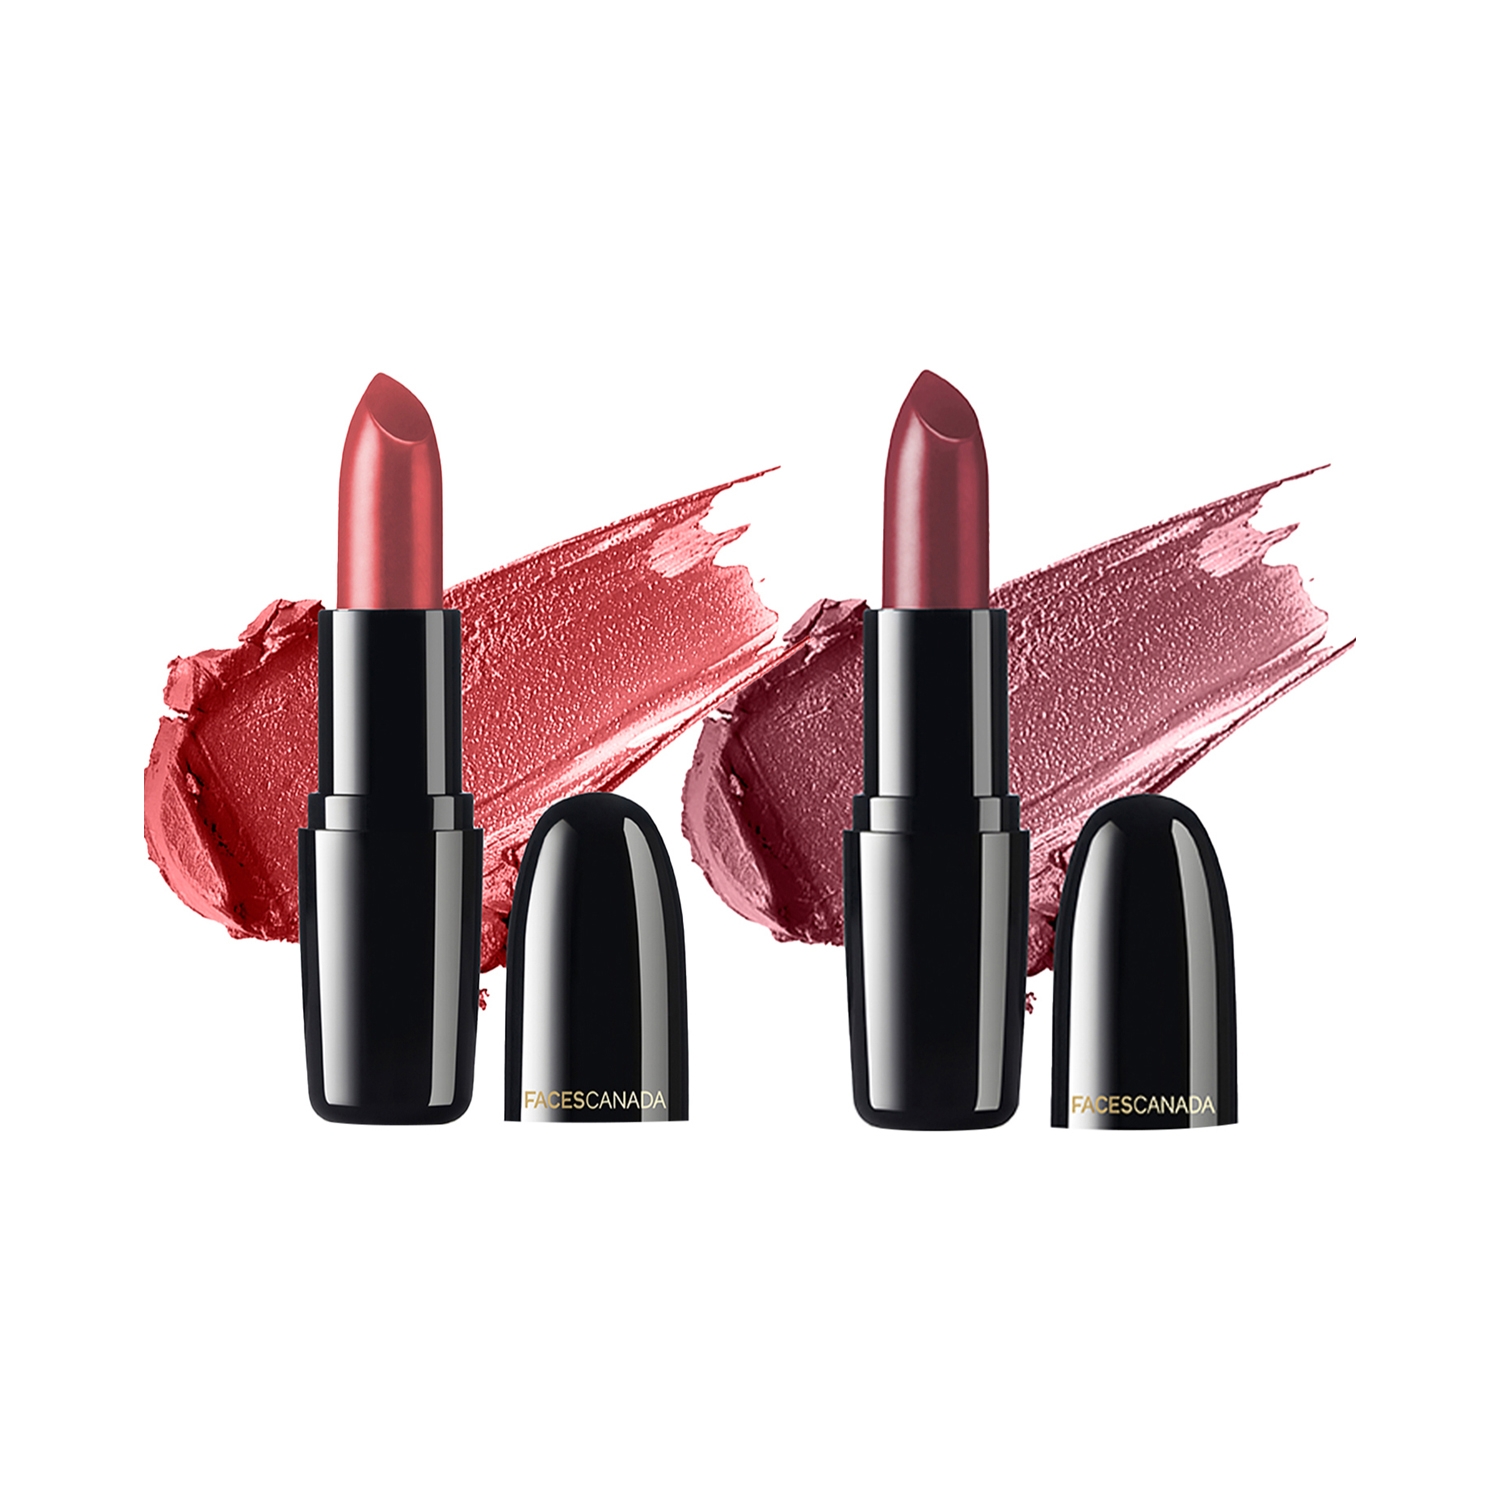 Faces Canada Festive Pout Weightless Creme Lipstick Combo Pack - Amber, Love Nude (2pcs)